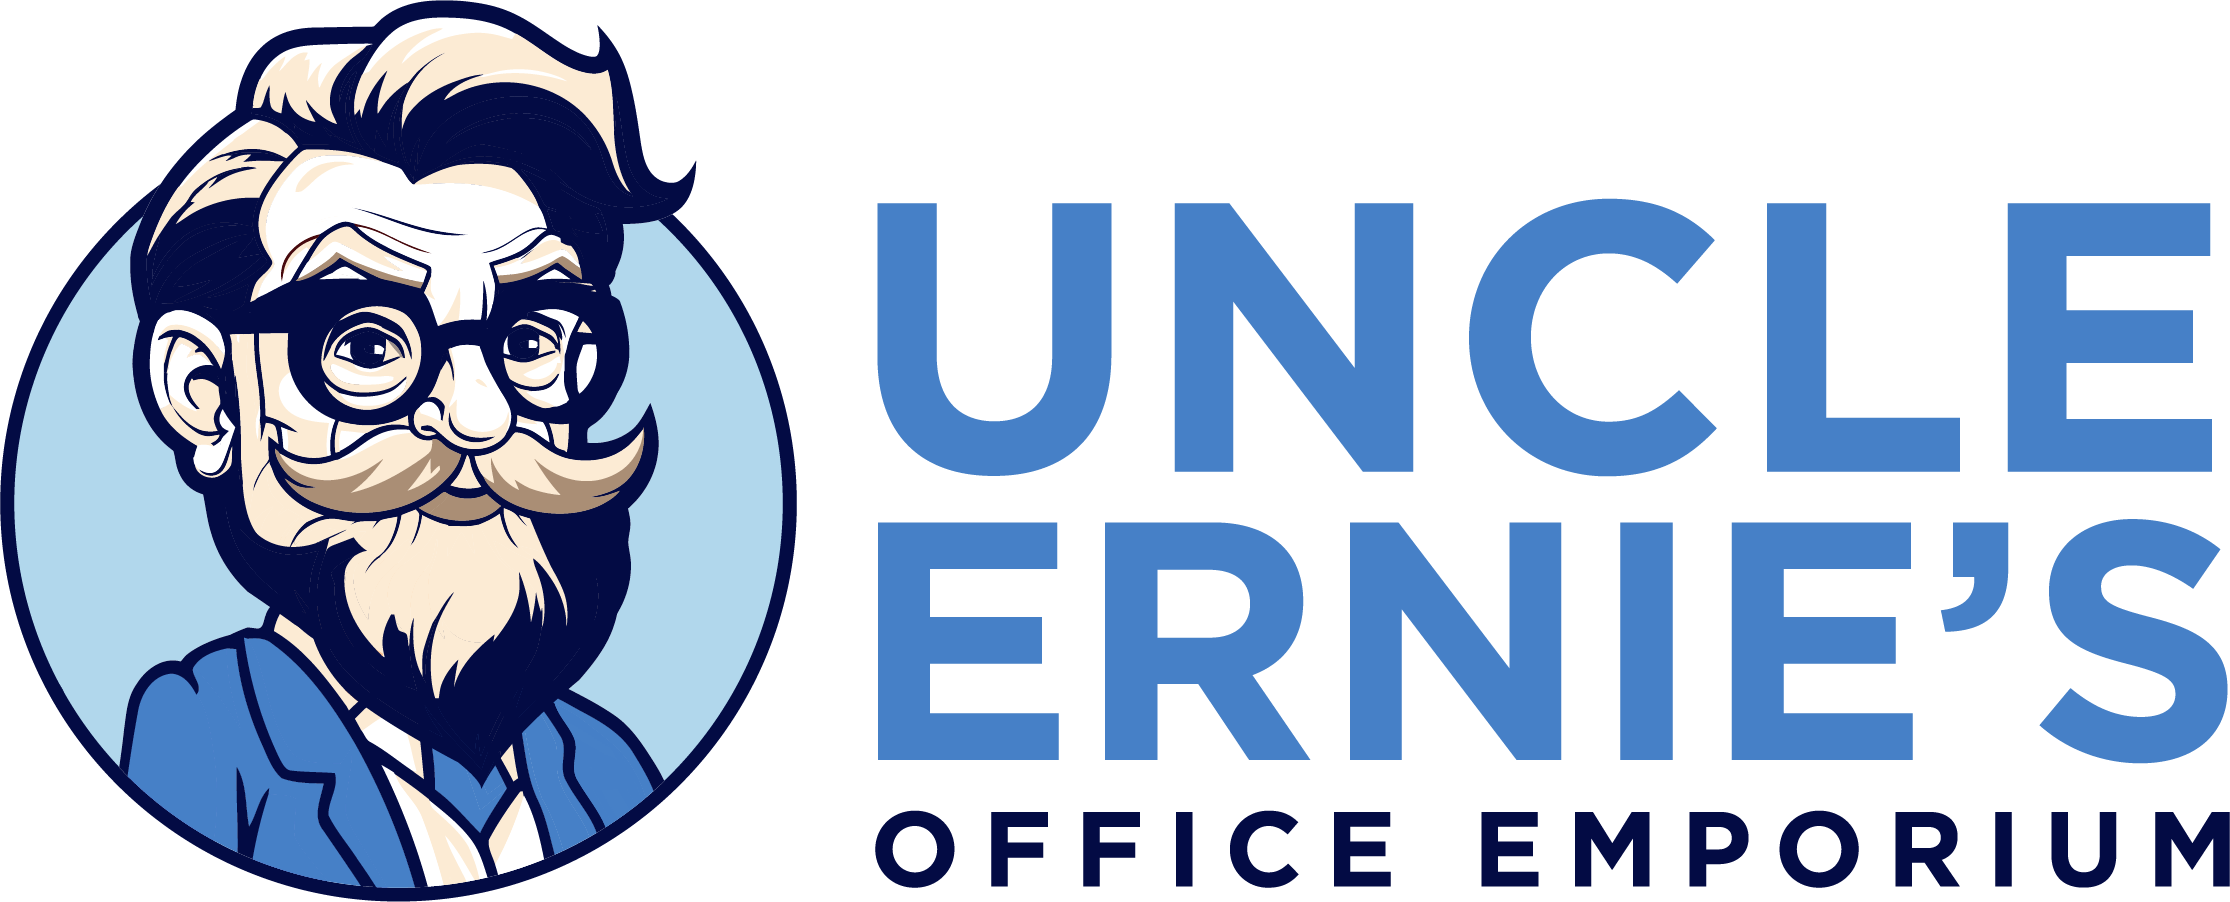 Uncle Ernie’s Office Emporium Introduces an Exquisite Line of Office Stationery Tailored for Efficiency and Elegance